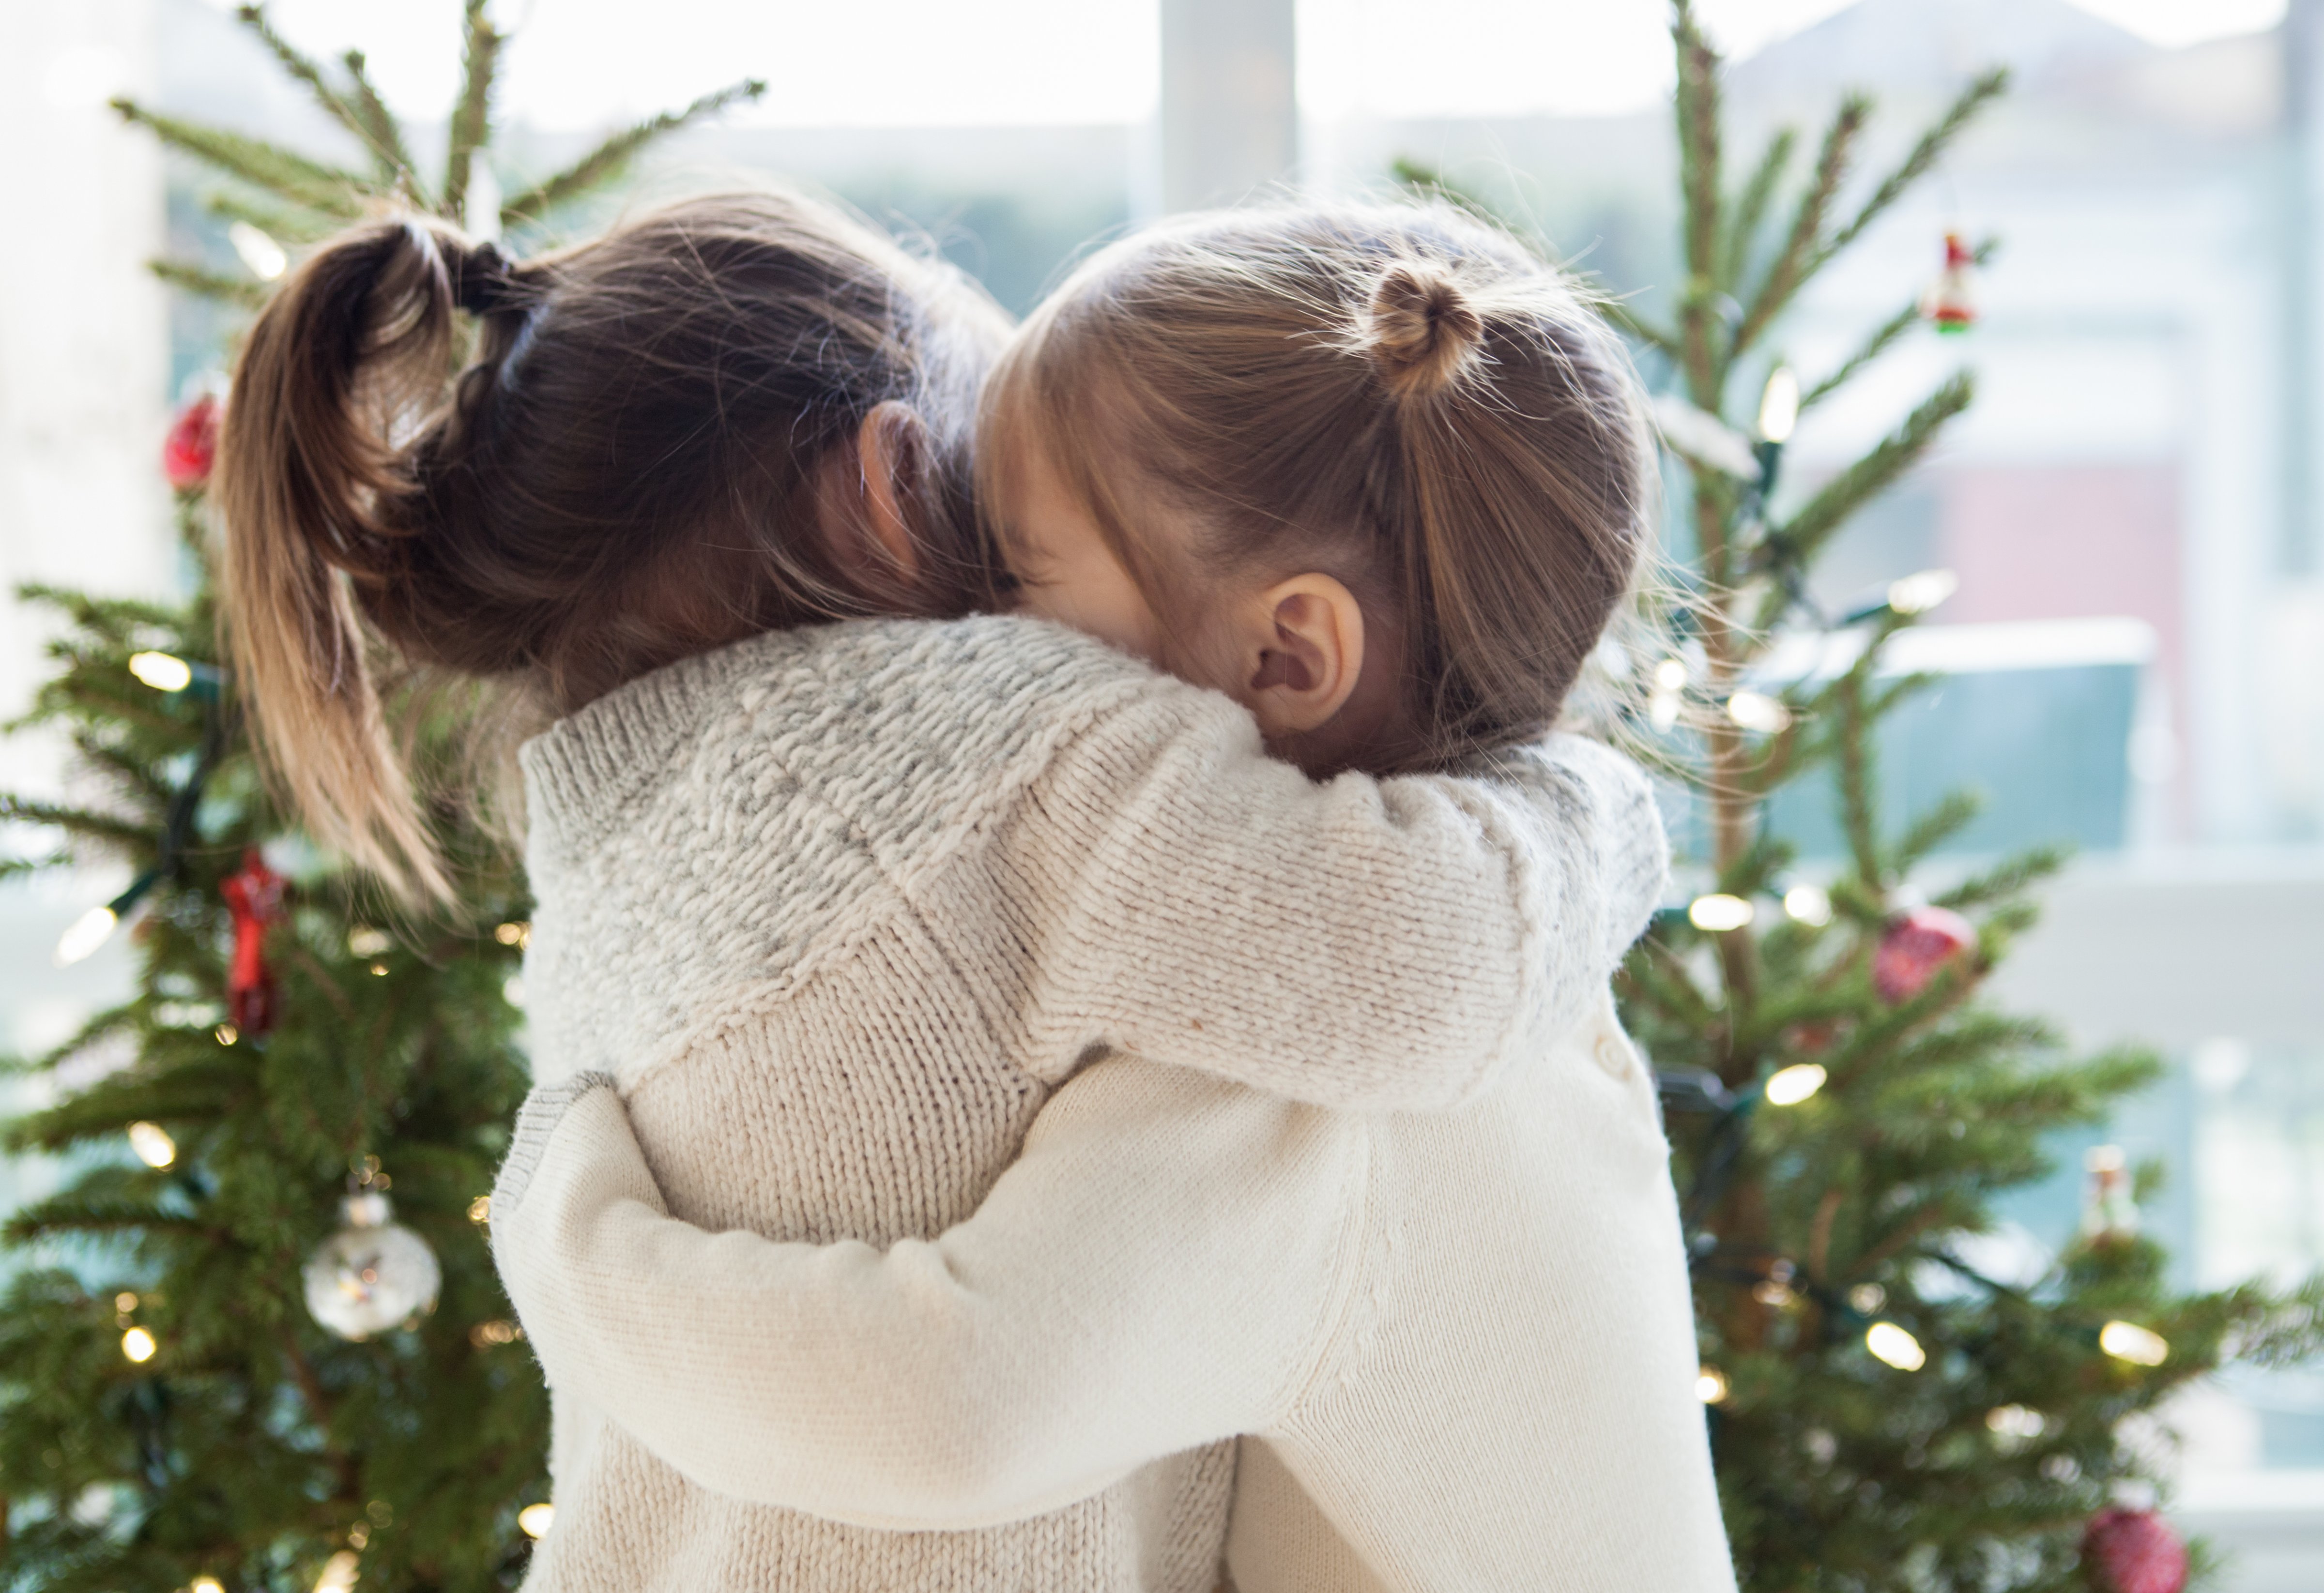 Girls hugging in front of Christmas trees